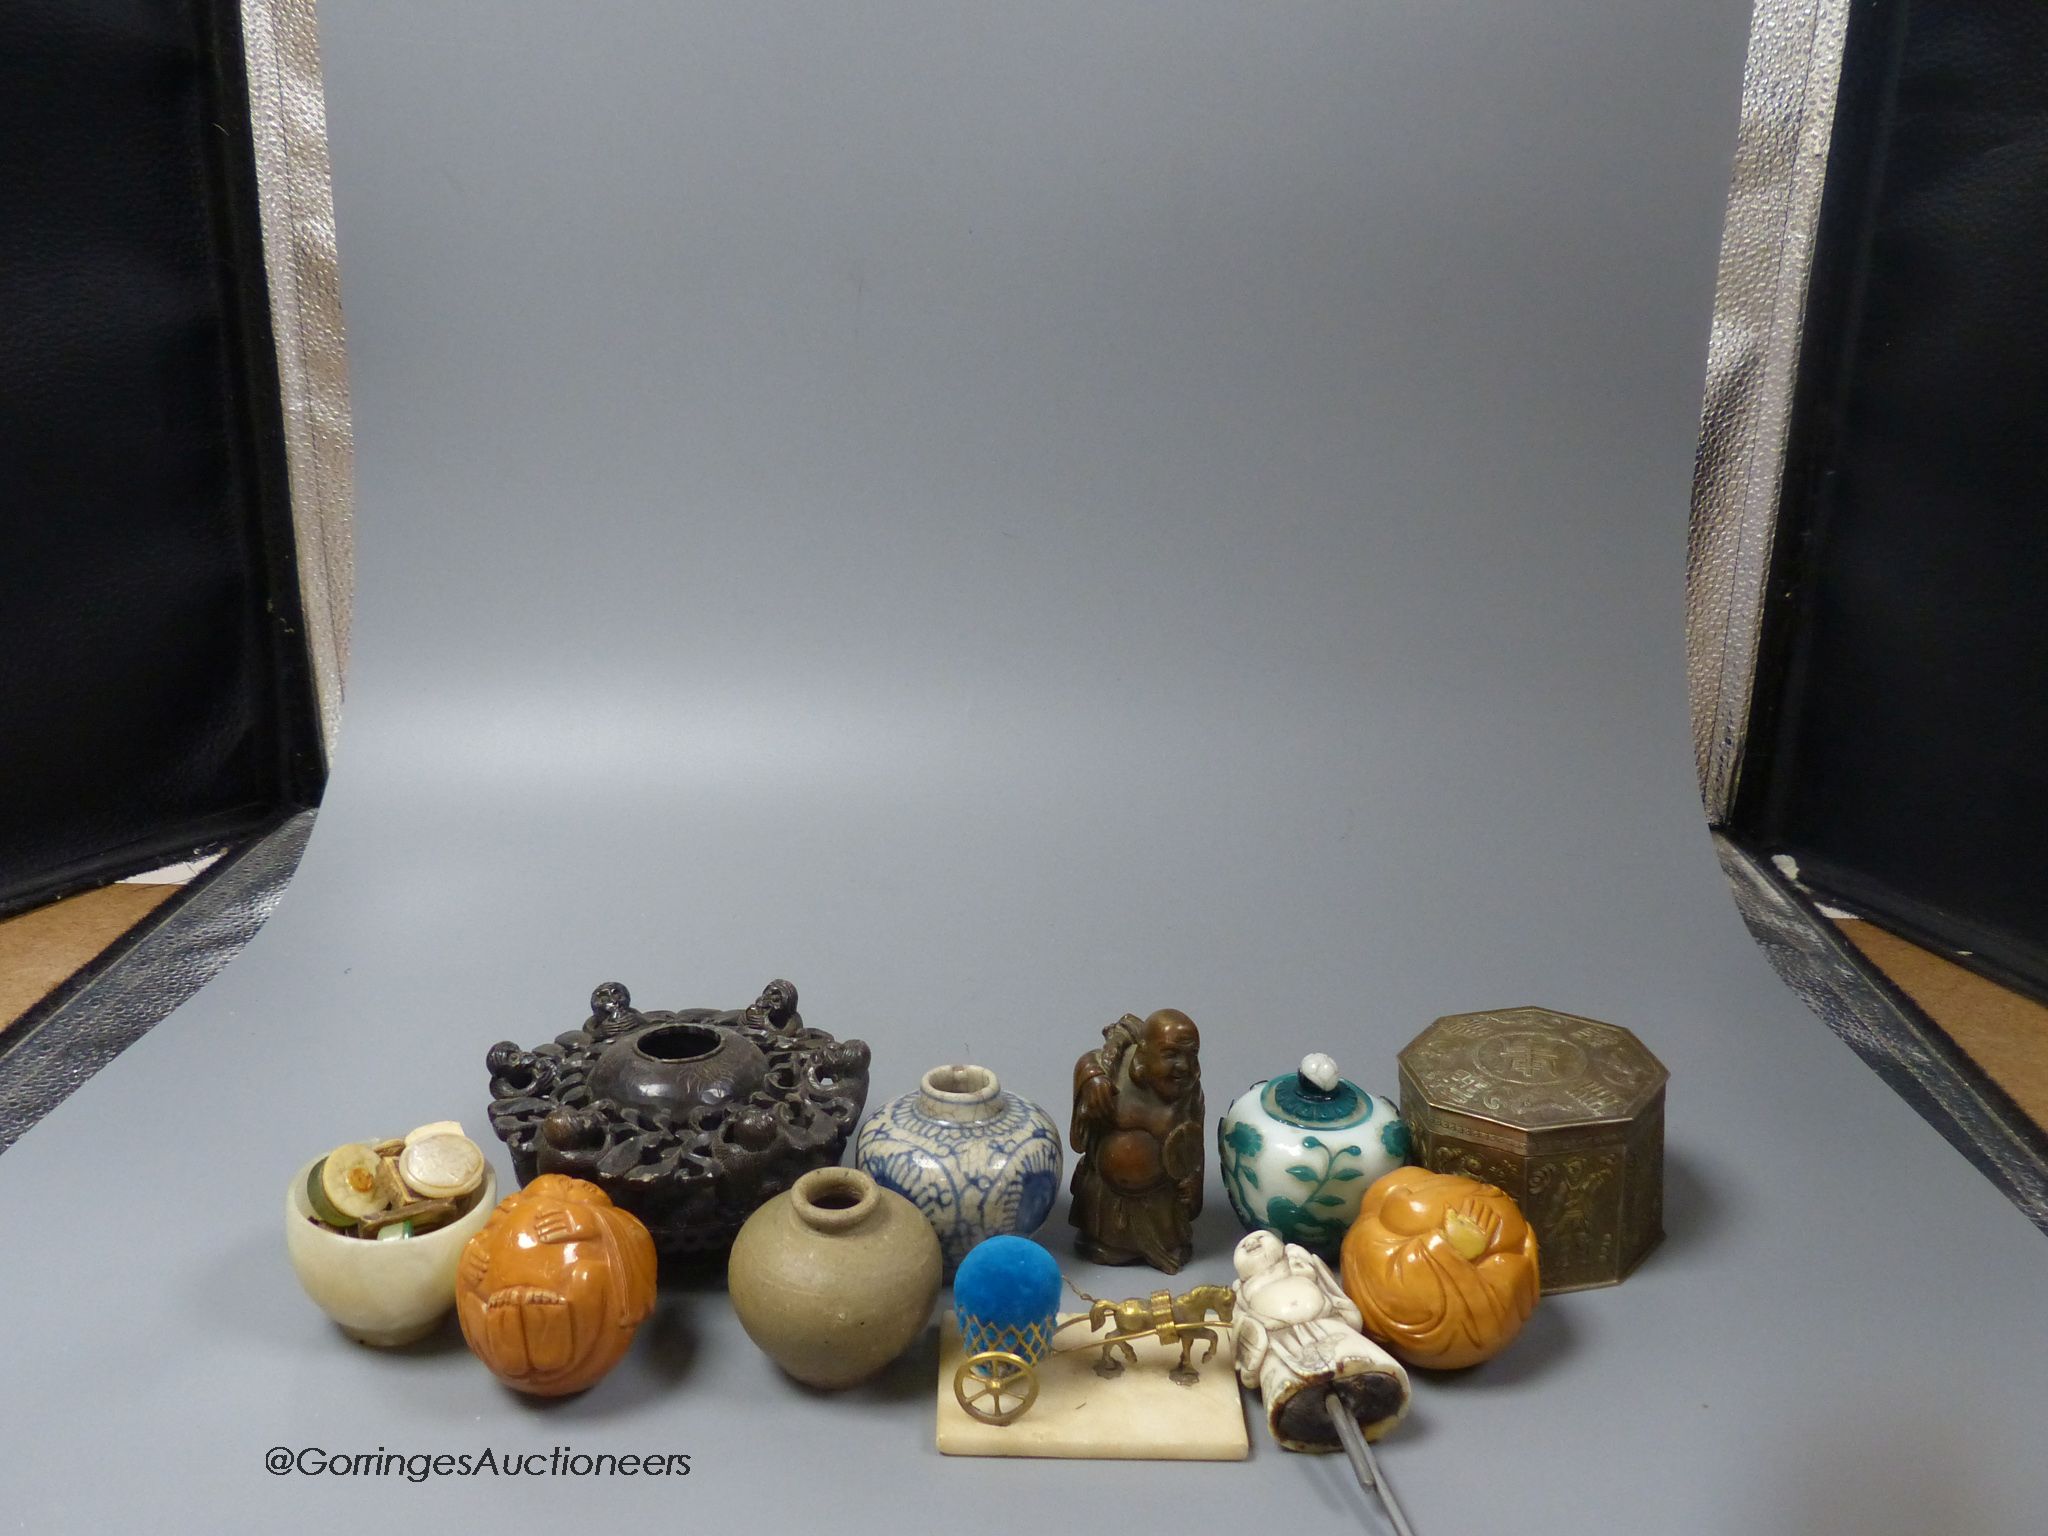 A collection of Chinese decorative pieces including glass, ceramic, metal and mineral